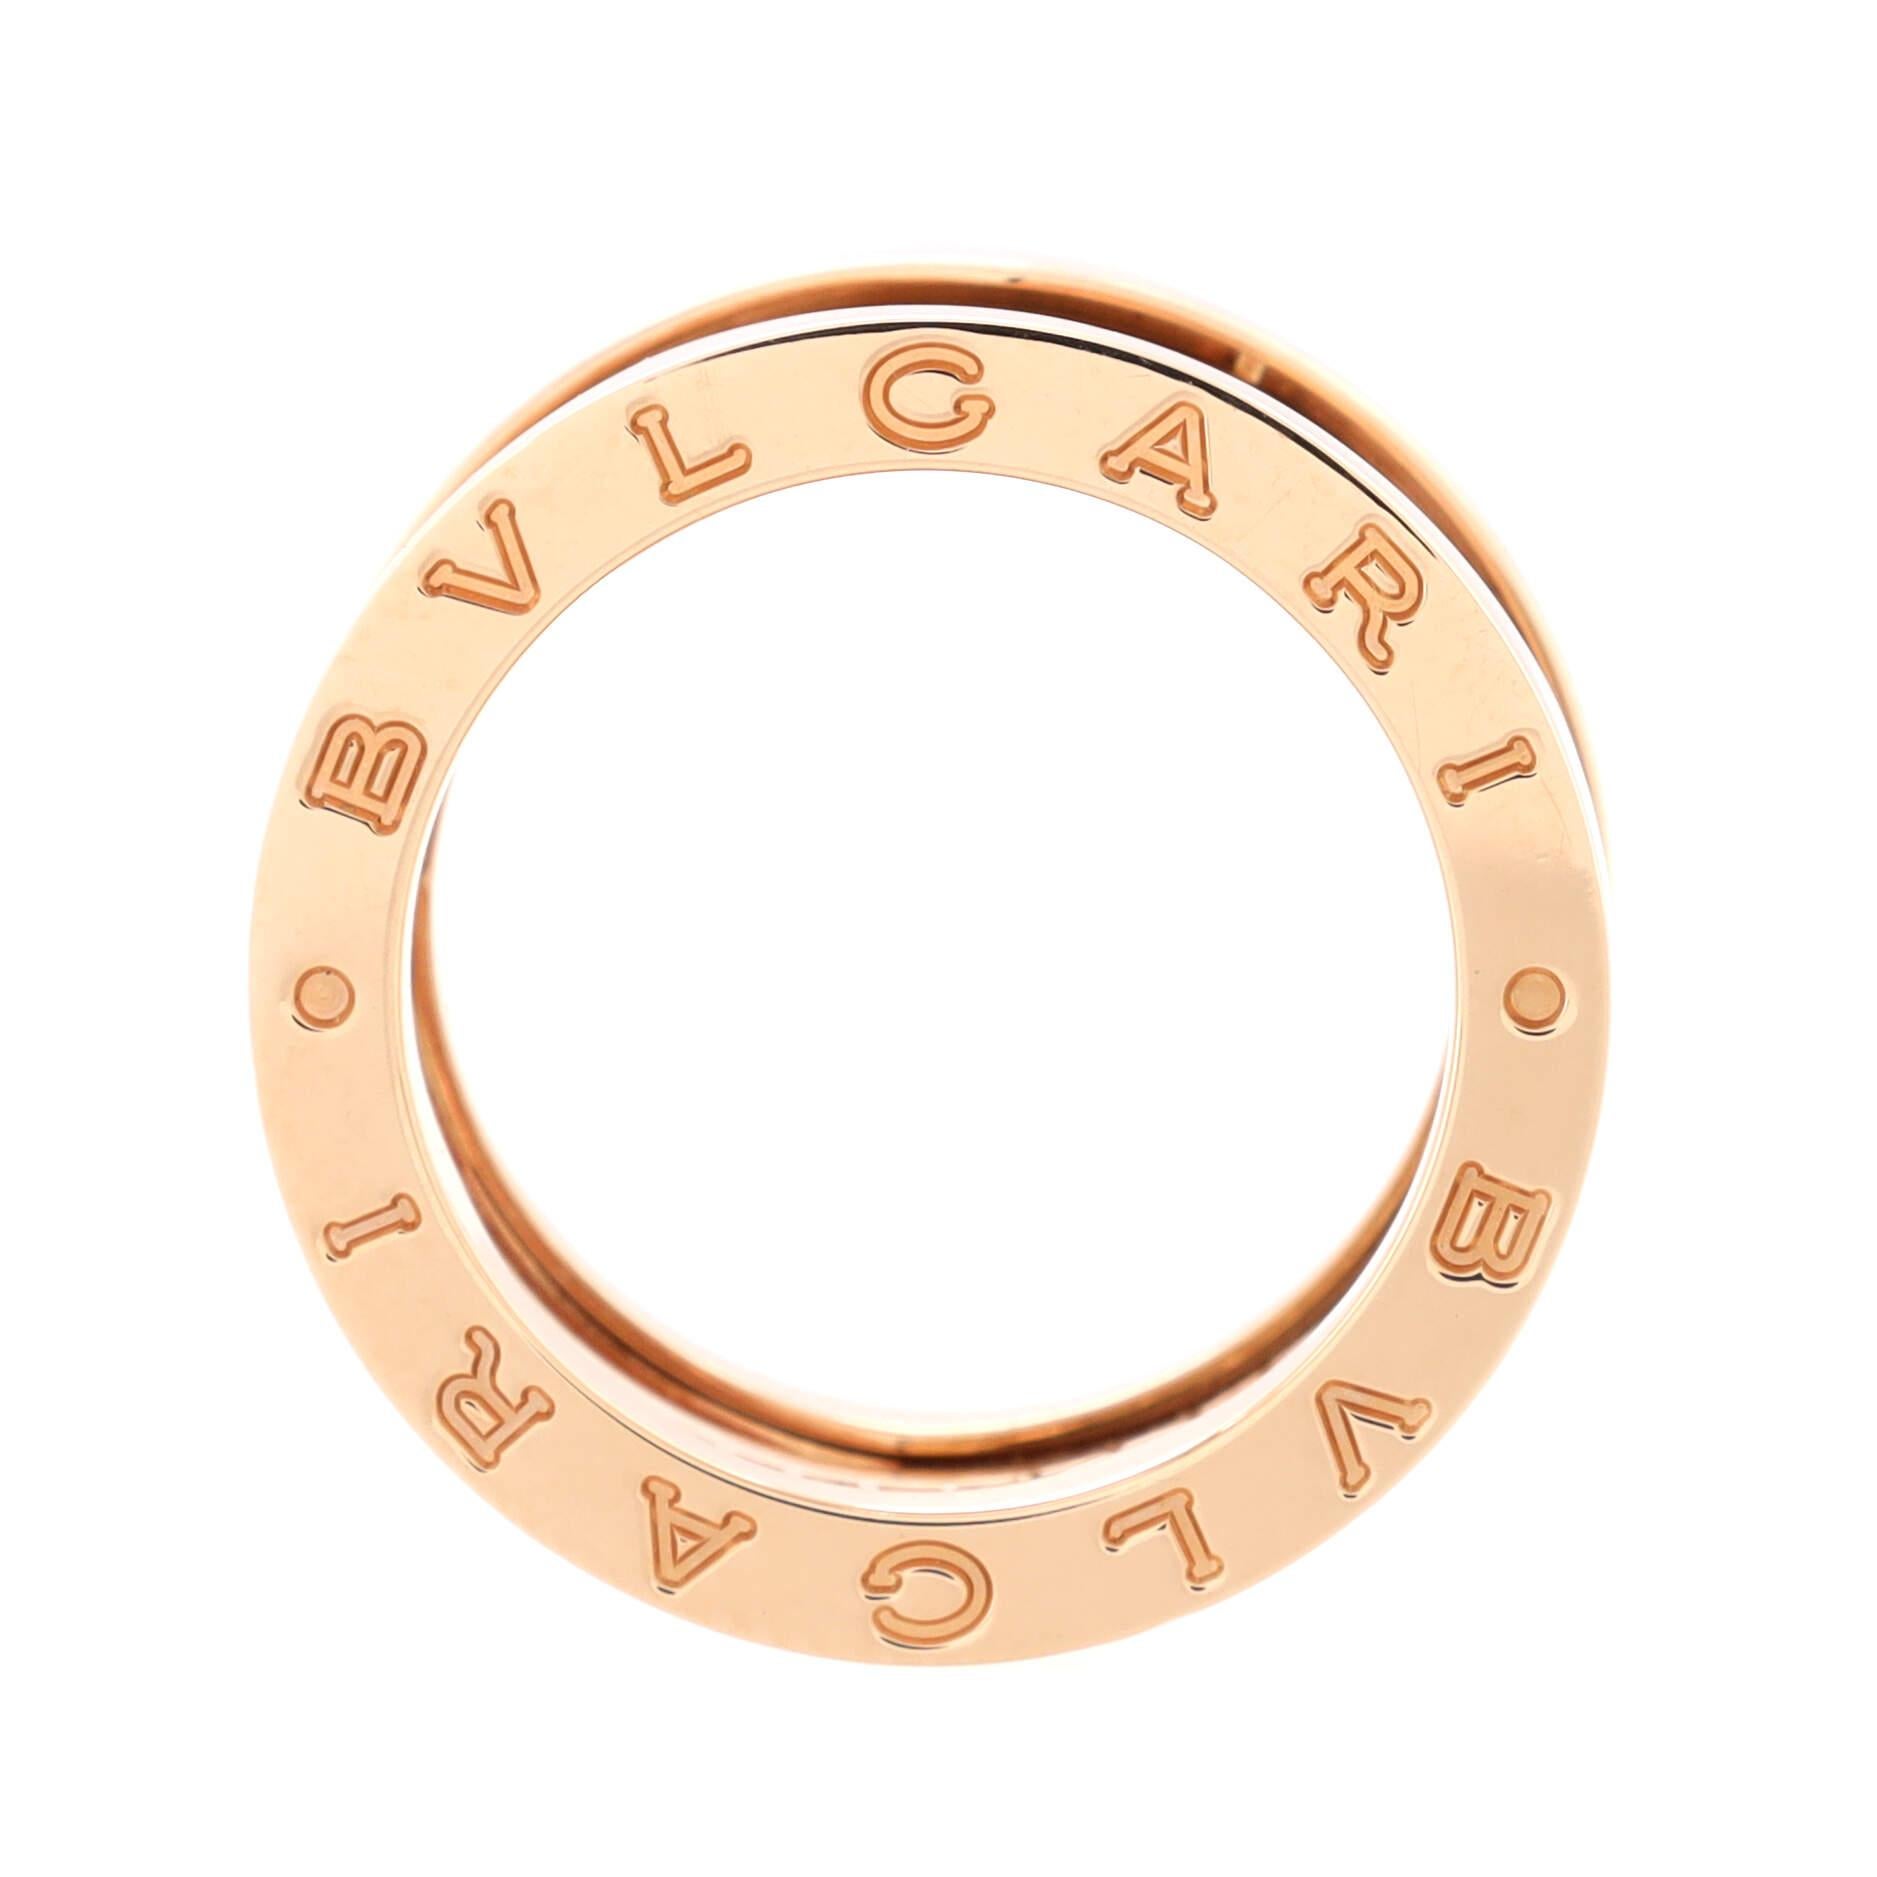 Condition: Great. Minor wear throughout.
Accessories: No Accessories
Measurements: Size: 6 - 52, Width: 9.45 mm
Designer: Bvlgari
Model: B.Zero1 Design Legend Zaha Hadid Three Band Ring 18K Rose Gold with Diamonds
Exterior Color: Rose Gold
Item